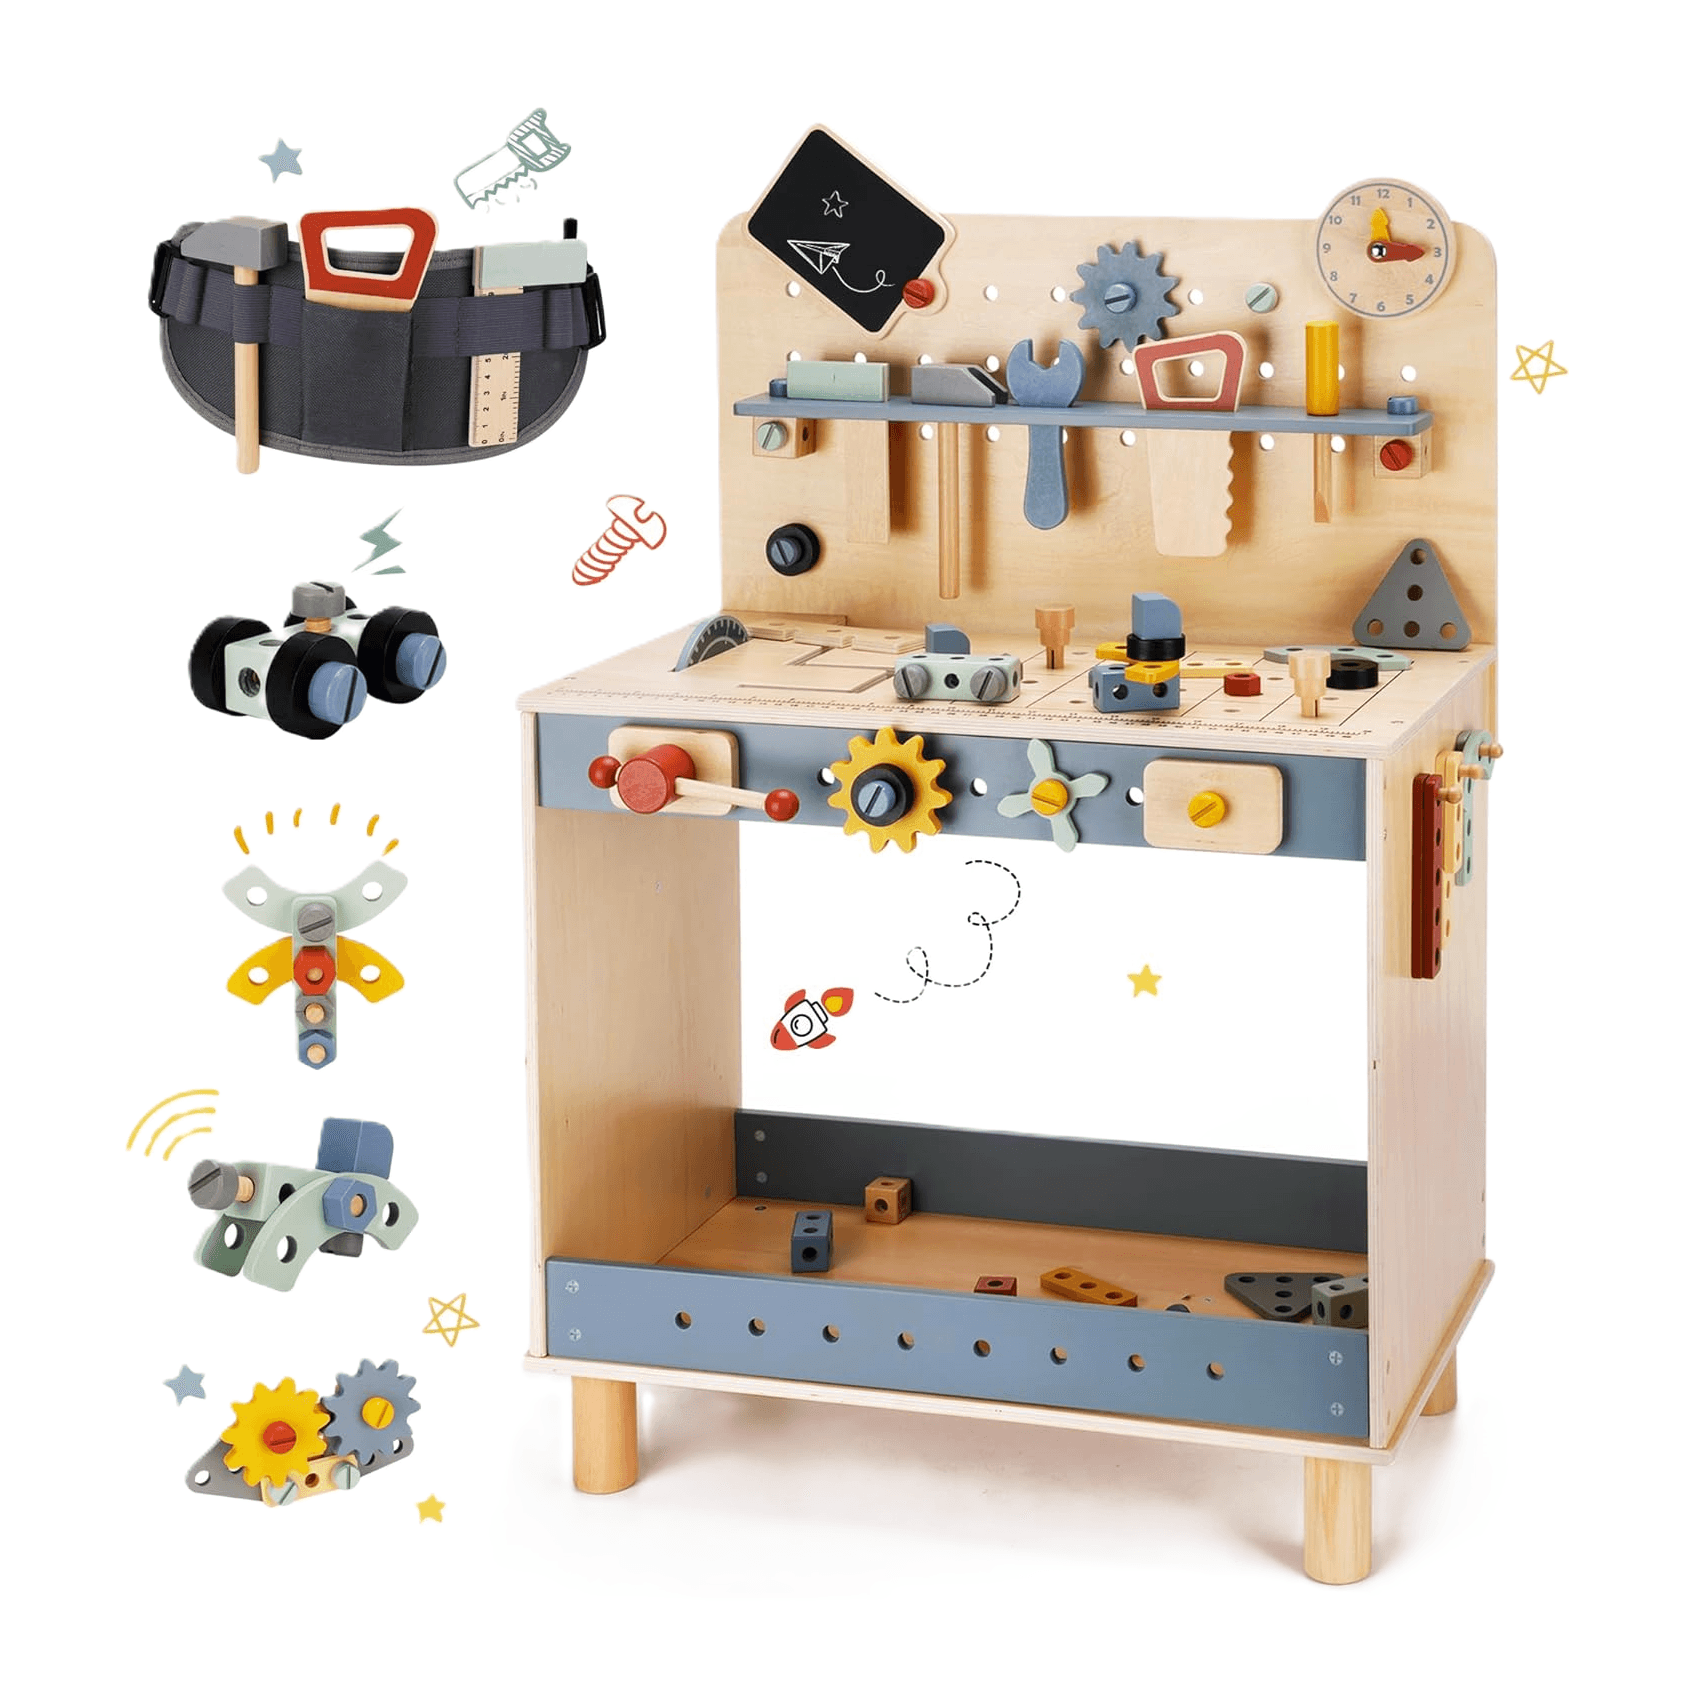 Montessori bpmfkid Deluxe Tool Playset With Workbench